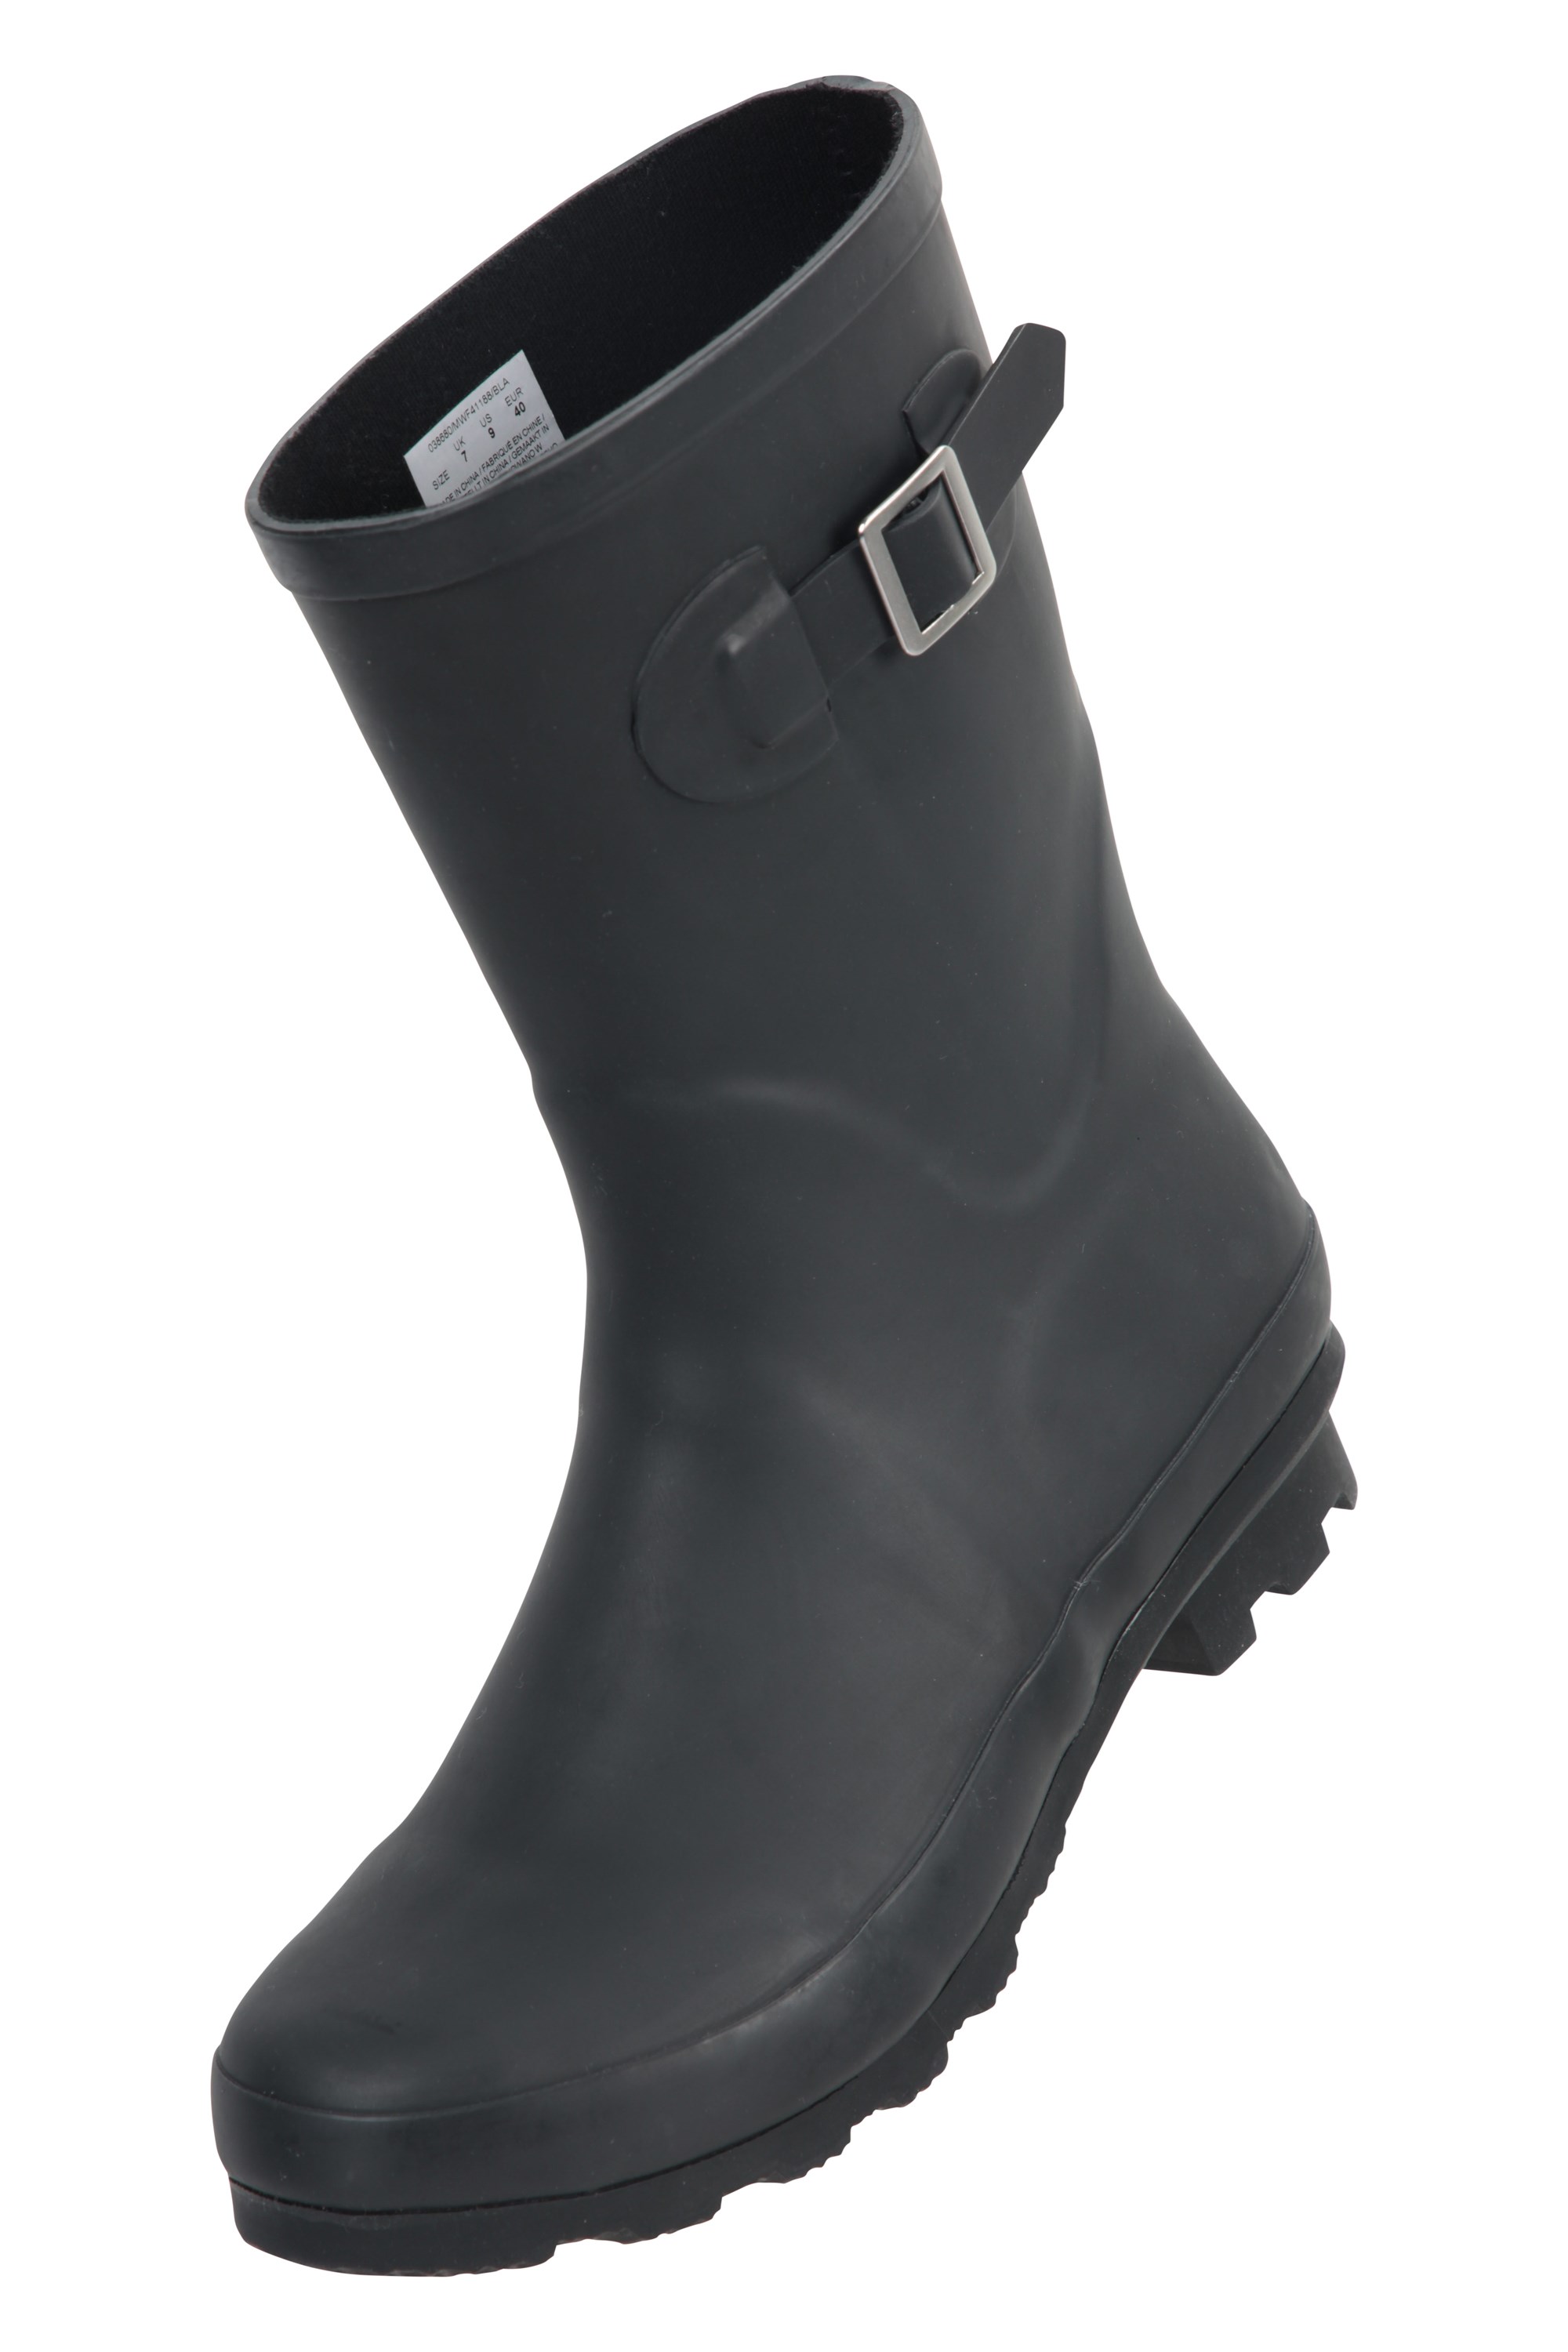 Mountain Warehouse Mid Height Womens Rubber Wellie